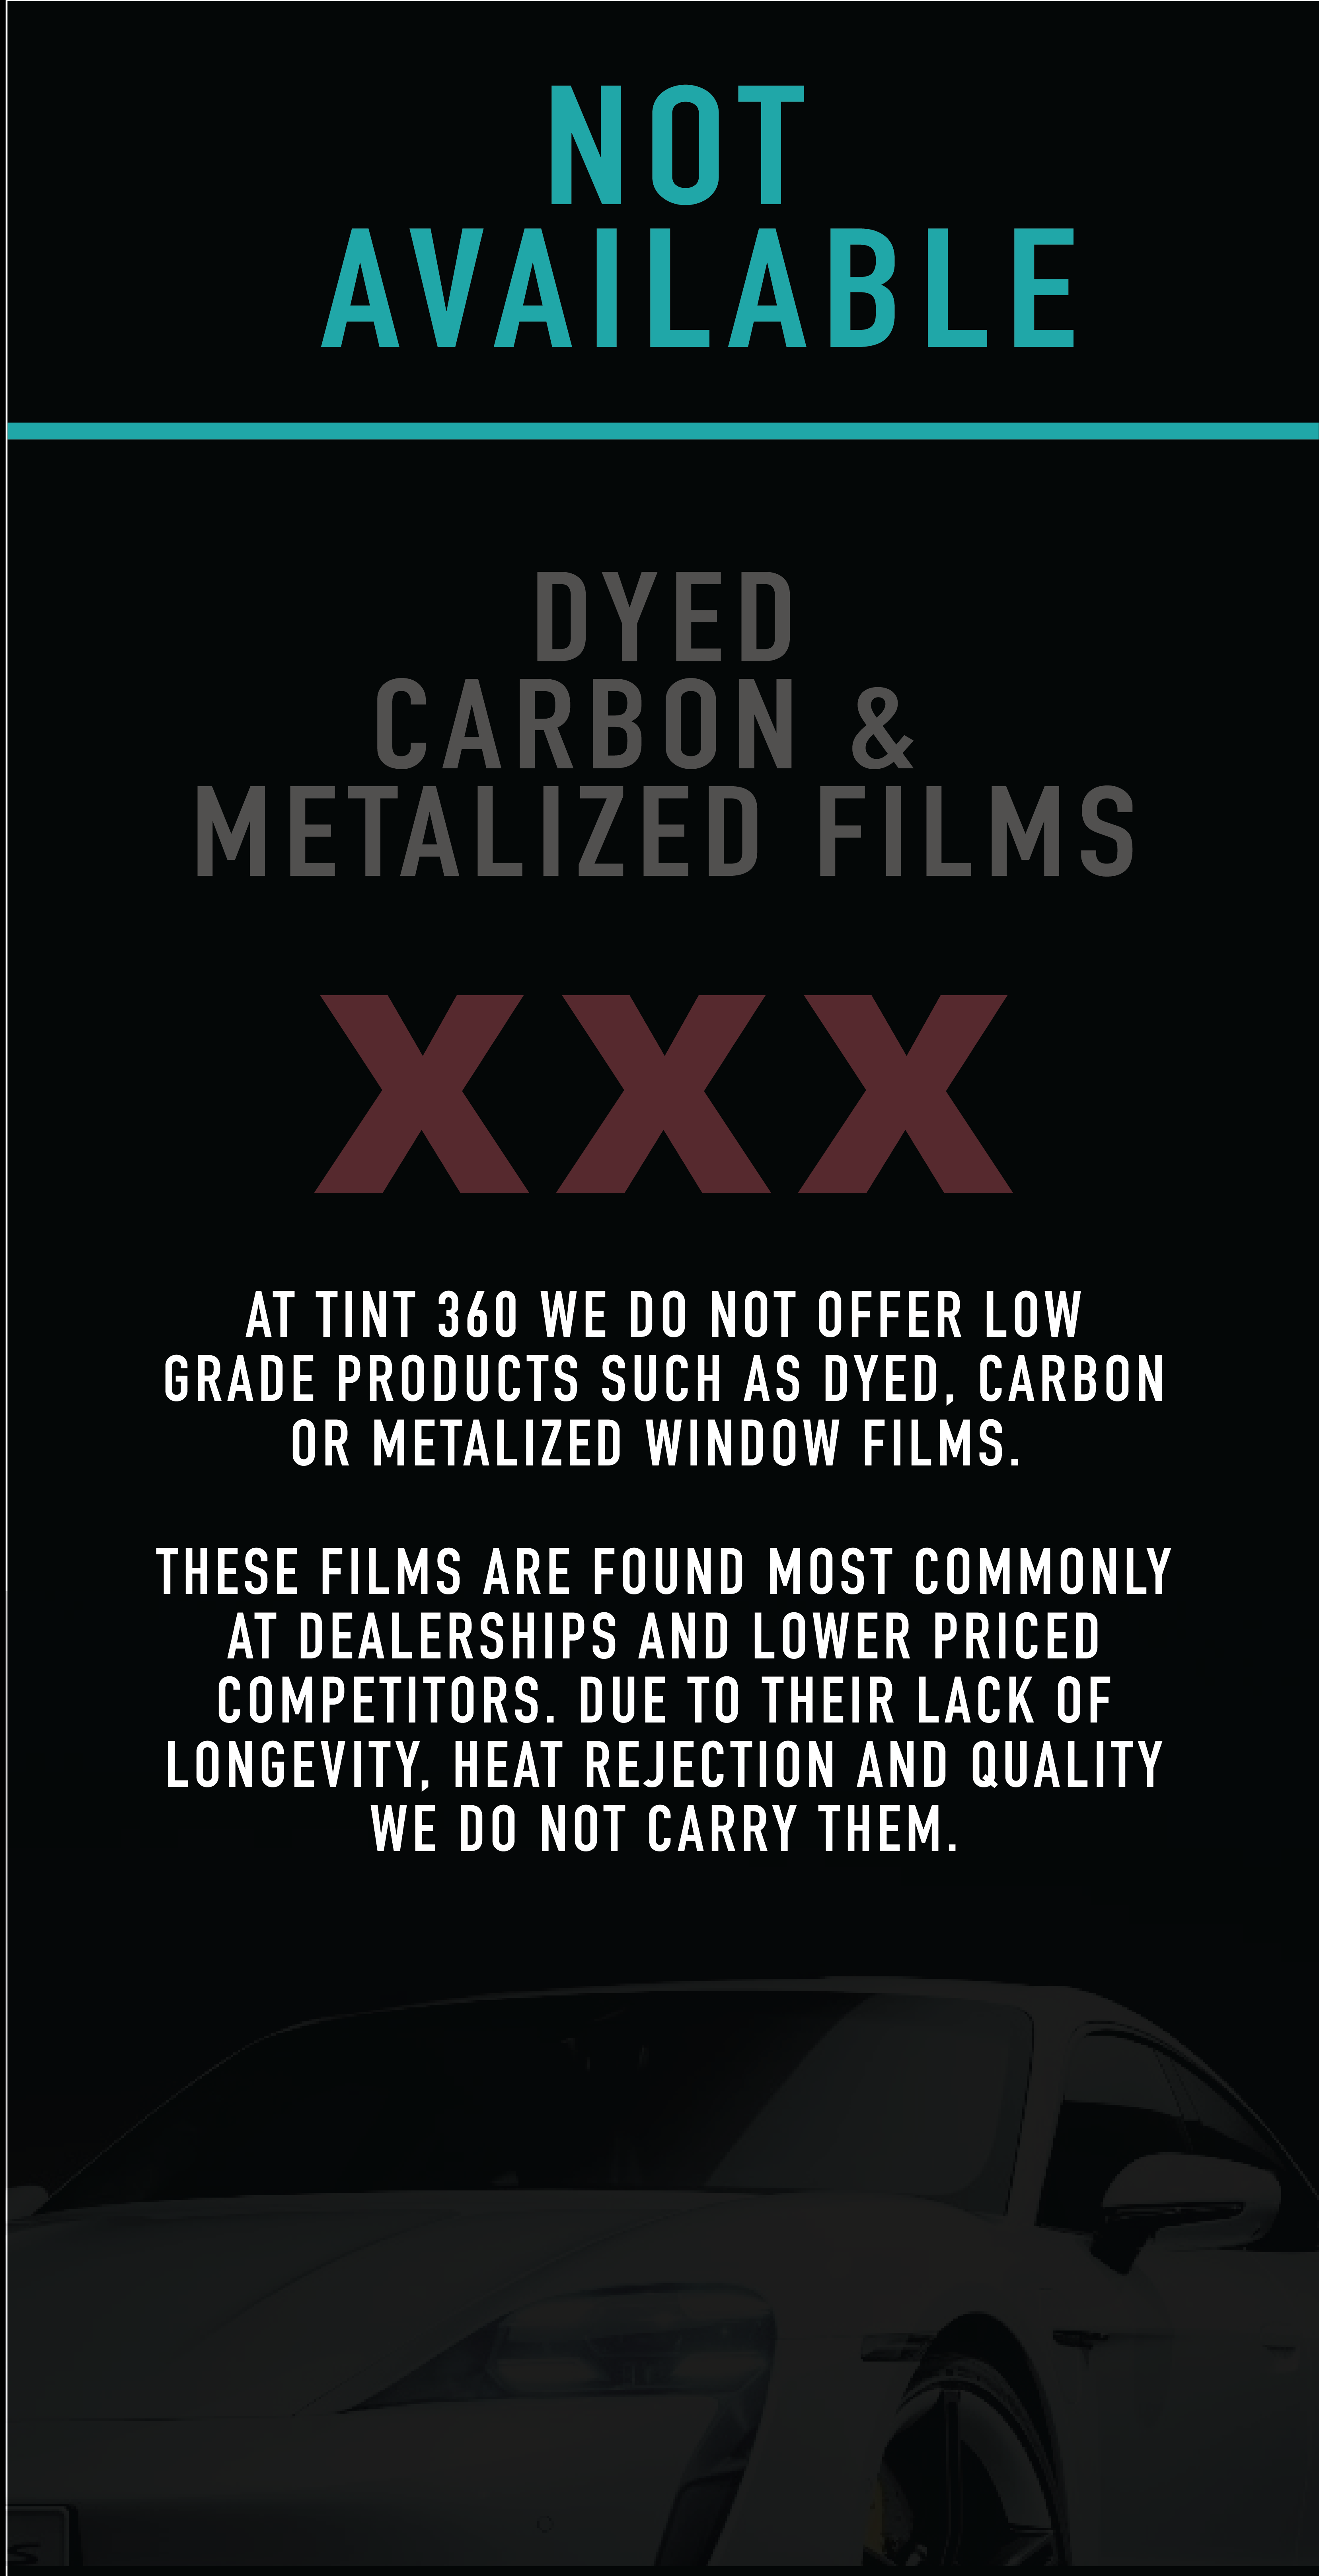 Dyed Carbon & Metalized Films